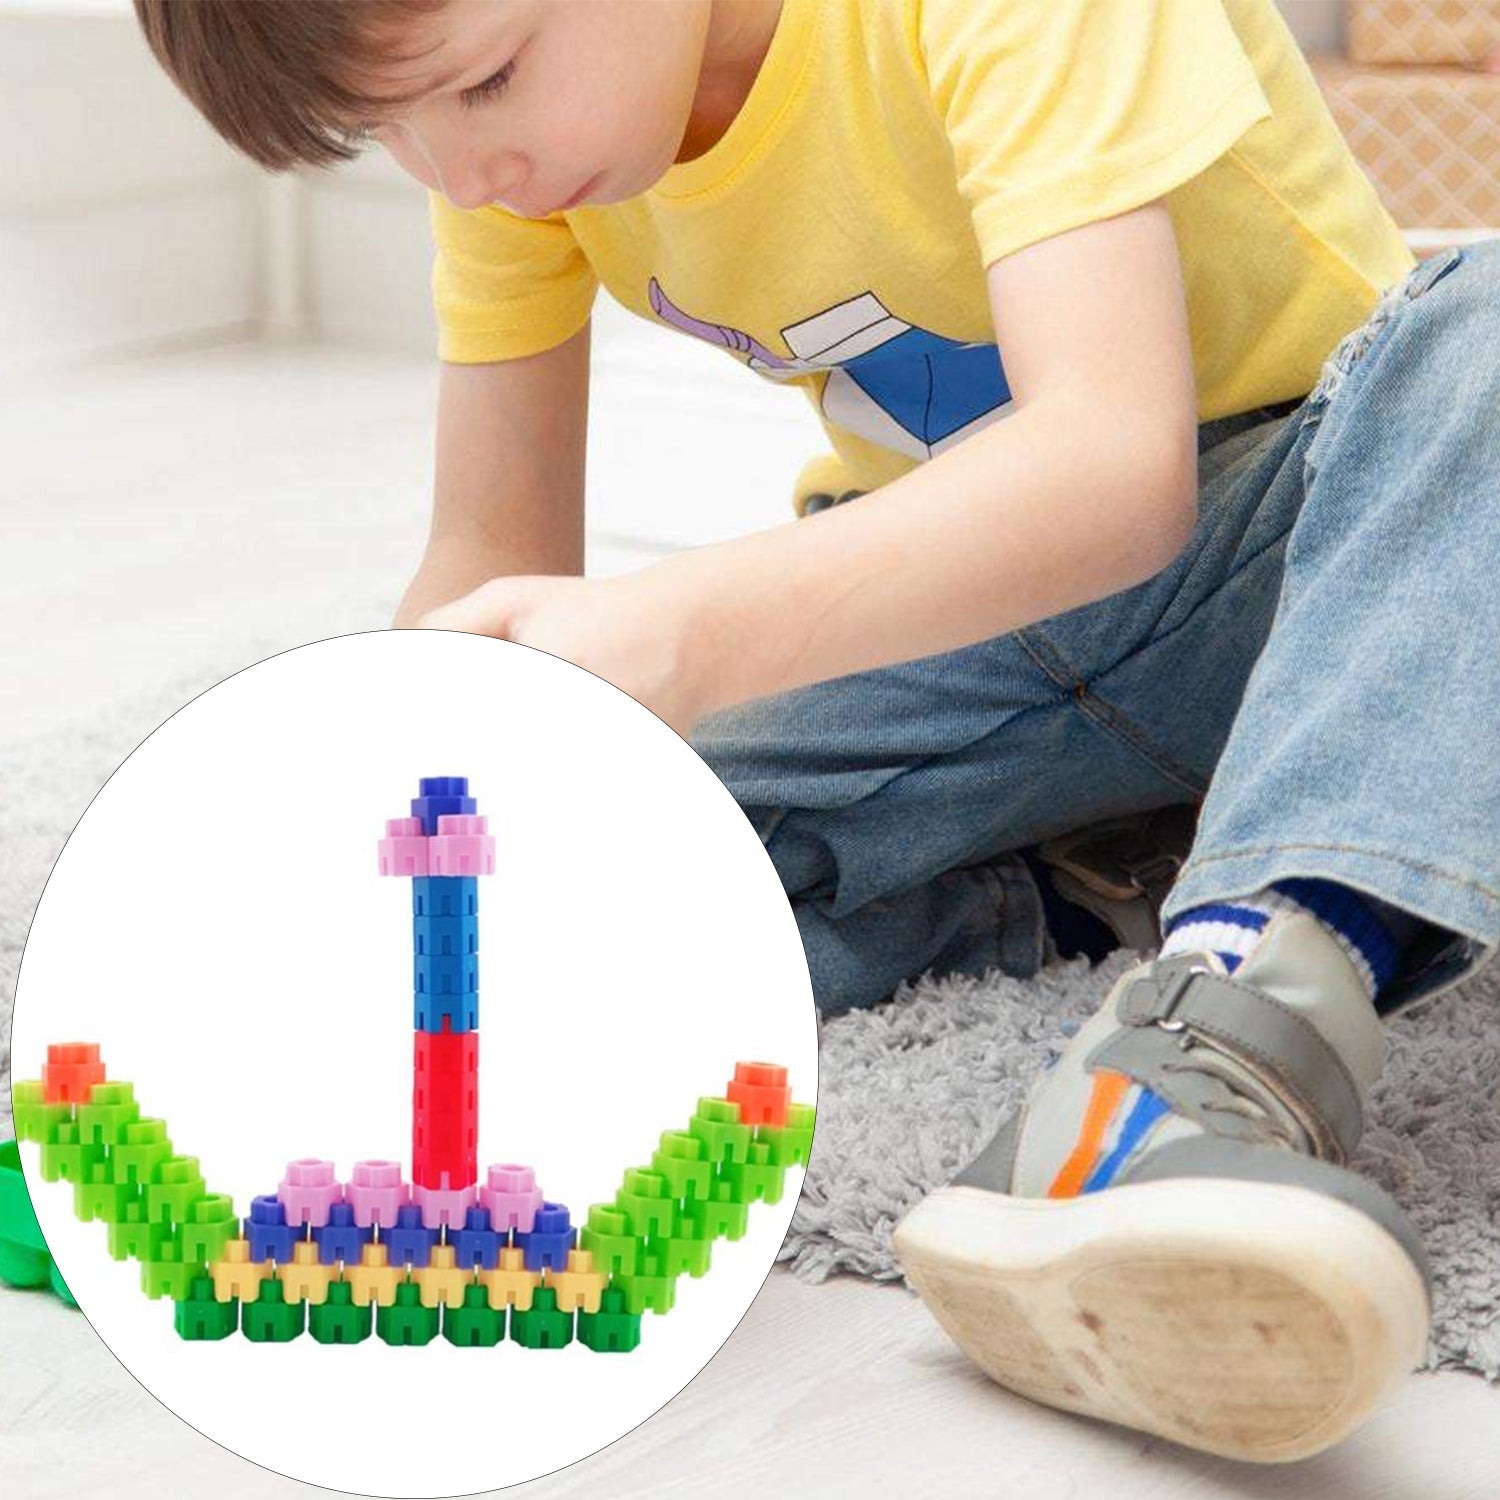 3908 120 Pc Hexa Blocks Toy used in all kinds of household and official places specially for kids and children for their playing and enjoying purposes.